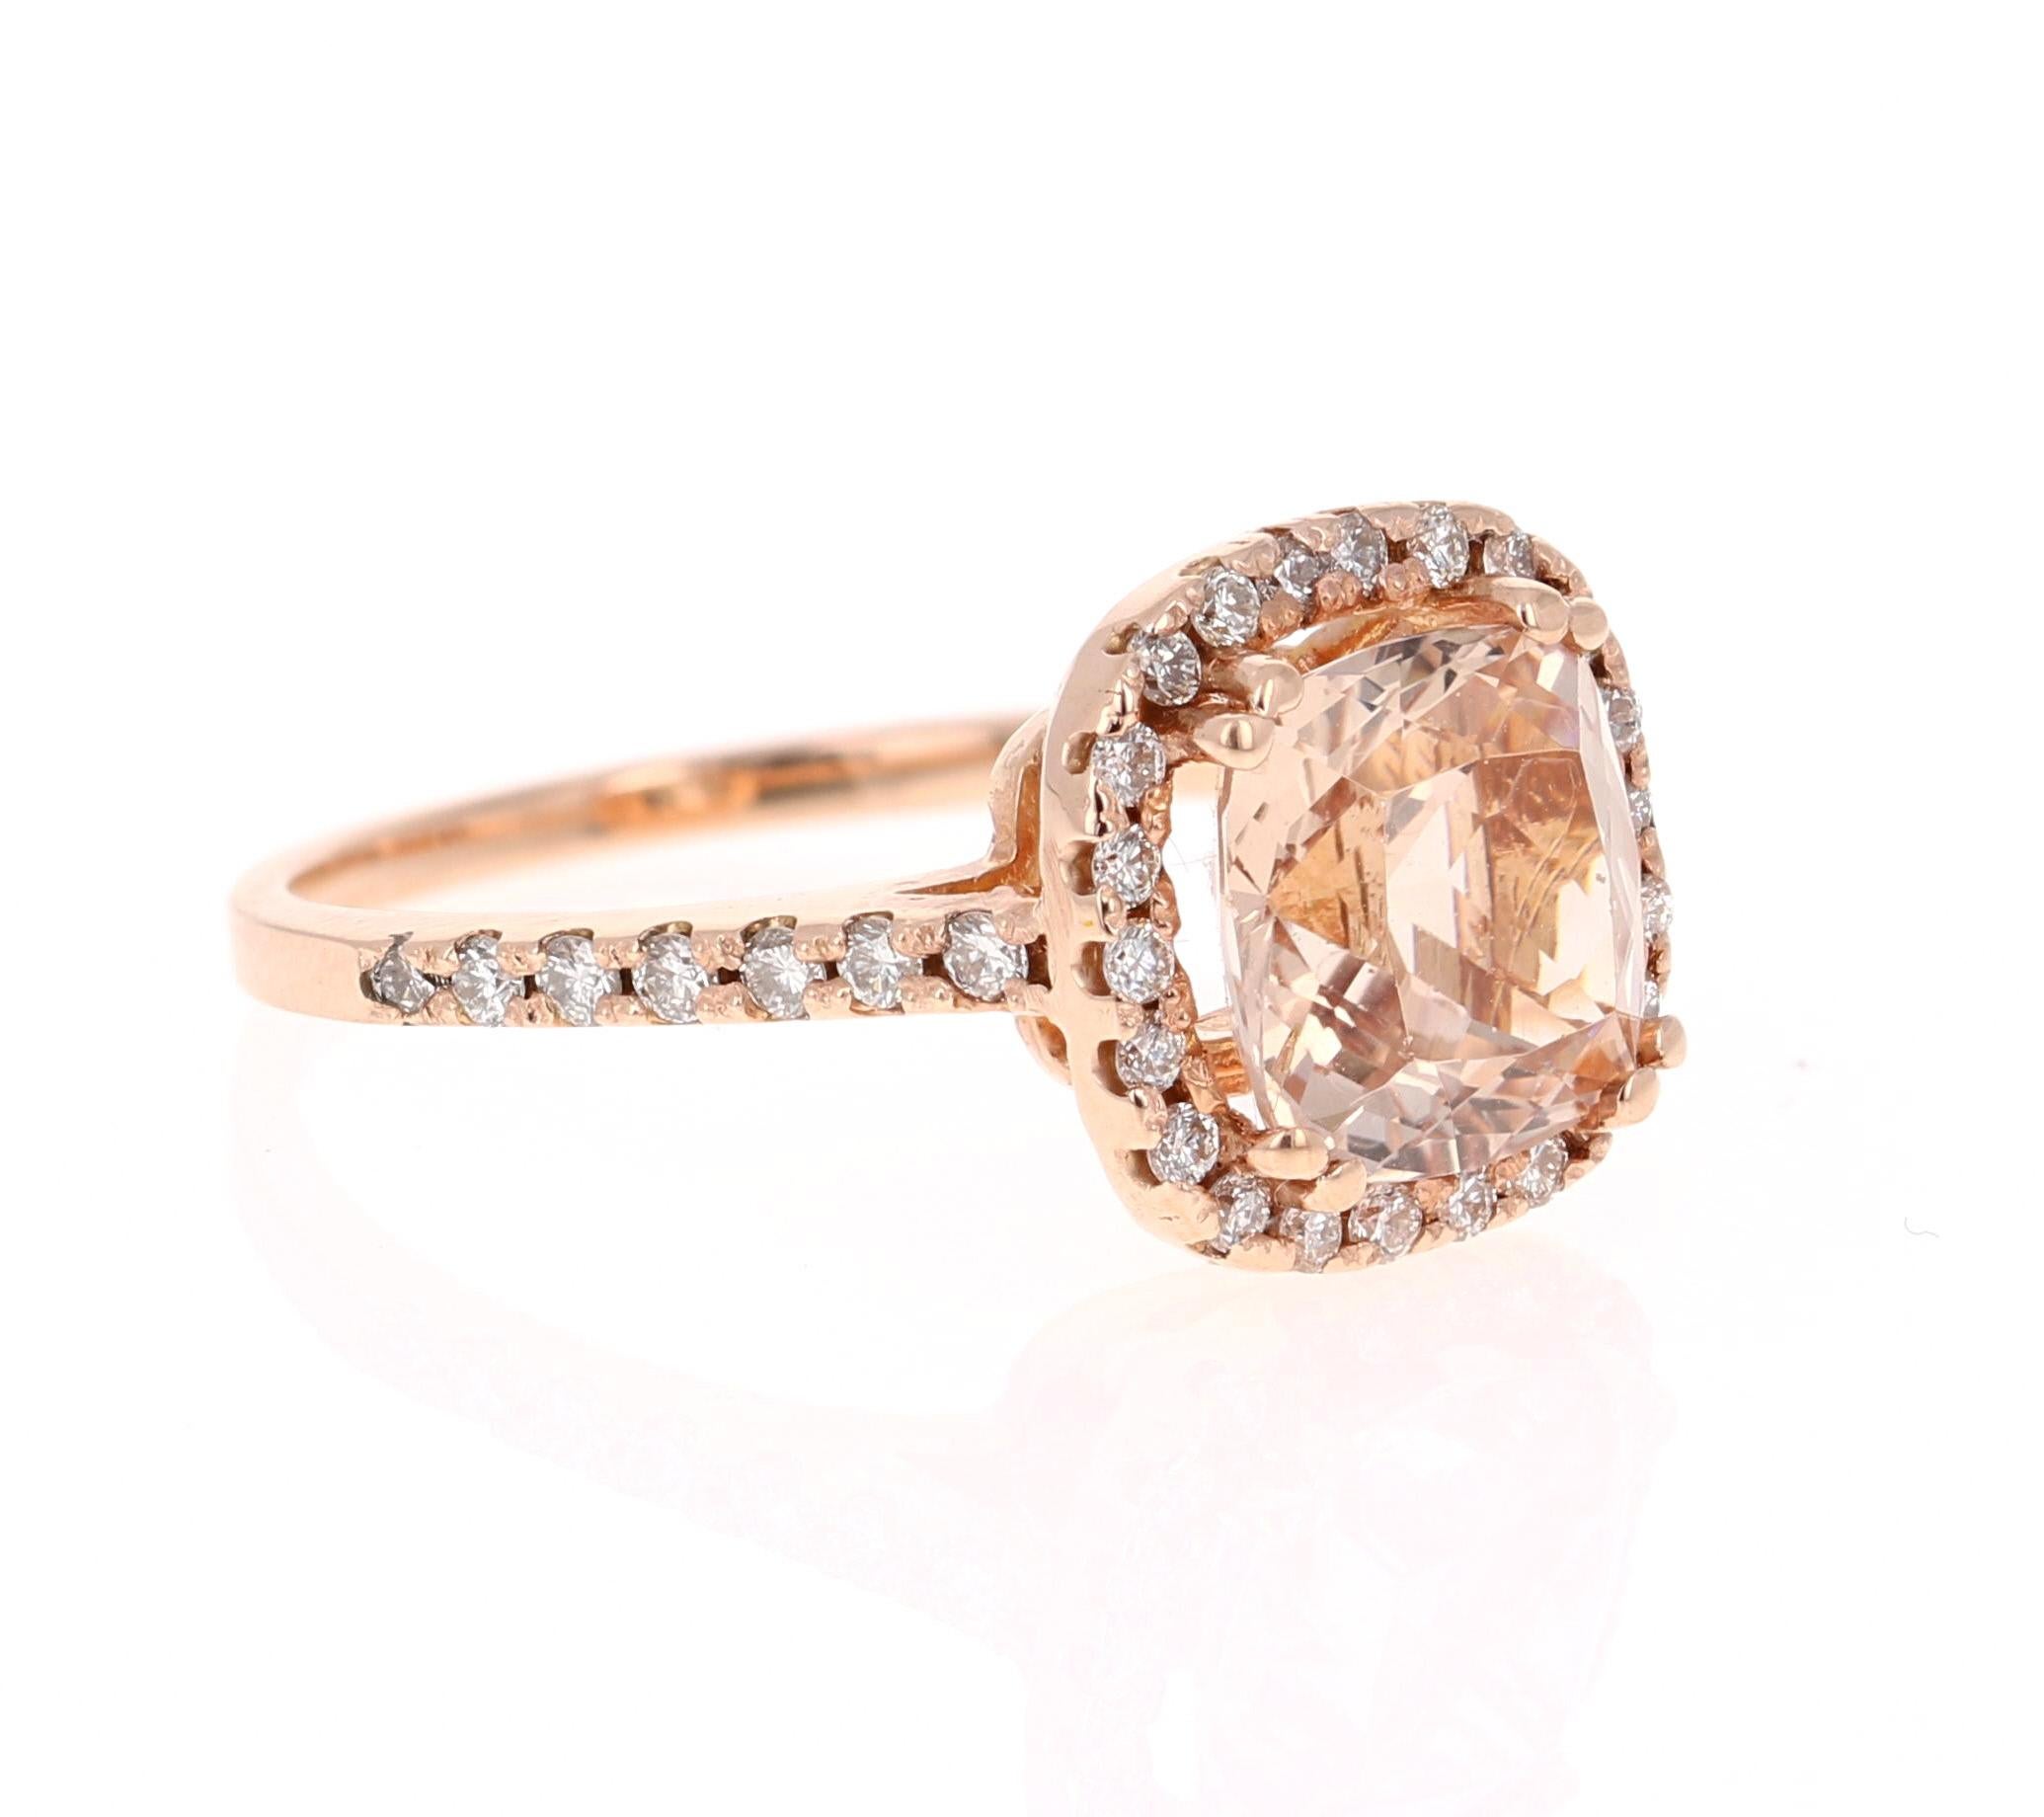 A lovely Engagement Ring Option! This simple yet gorgeous Morganite Ring has a 2.67 Carat Cushion Cut Morganite as its center and has a beautiful simple halo of 38 Round Cut Diamonds that weigh 0.49 carats. (Clarity: VS, Color: H) The total carat